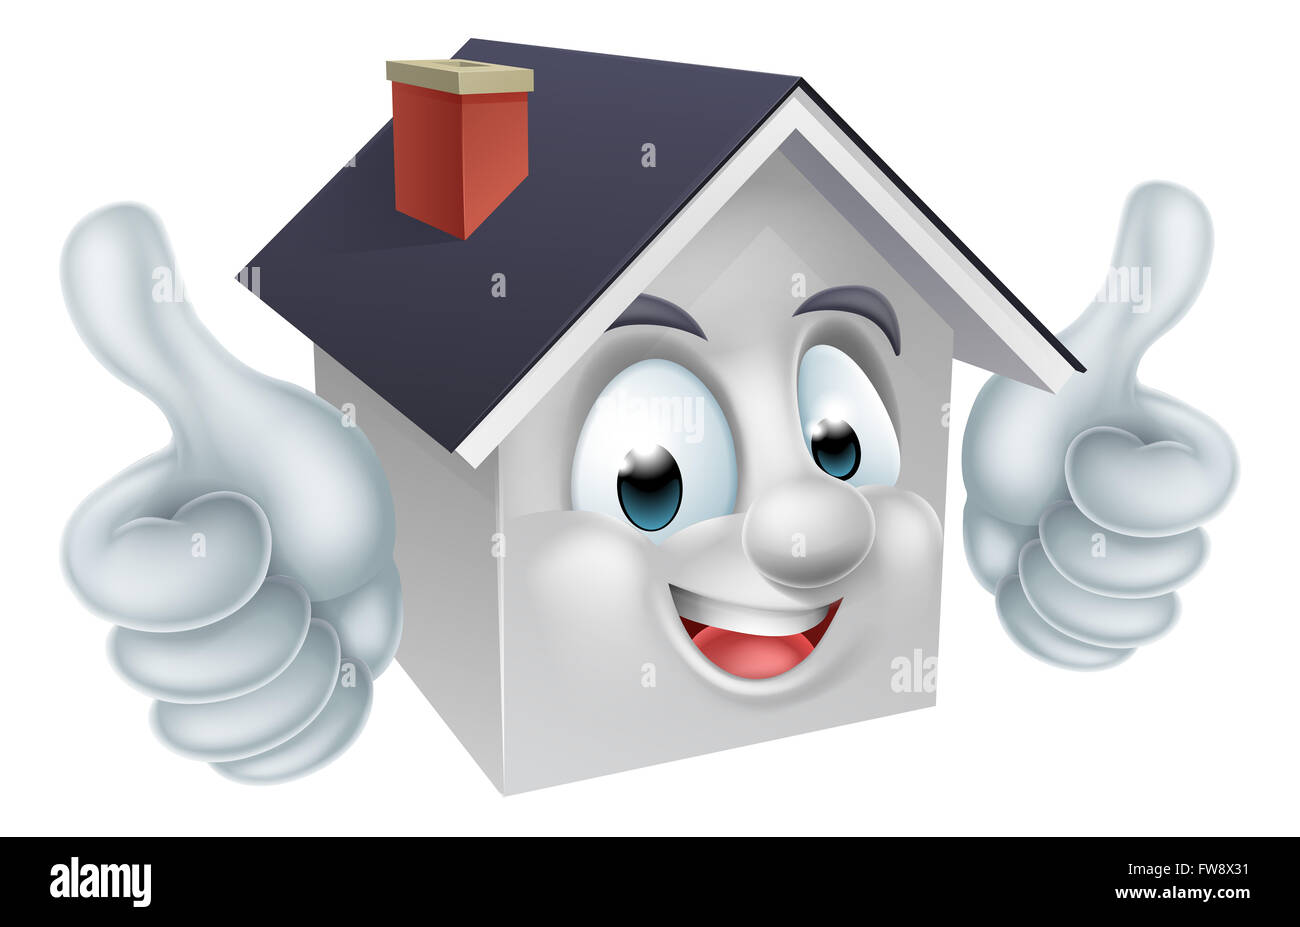 A happy cartoon house man mascot character doing a double thumbs up Stock Photo